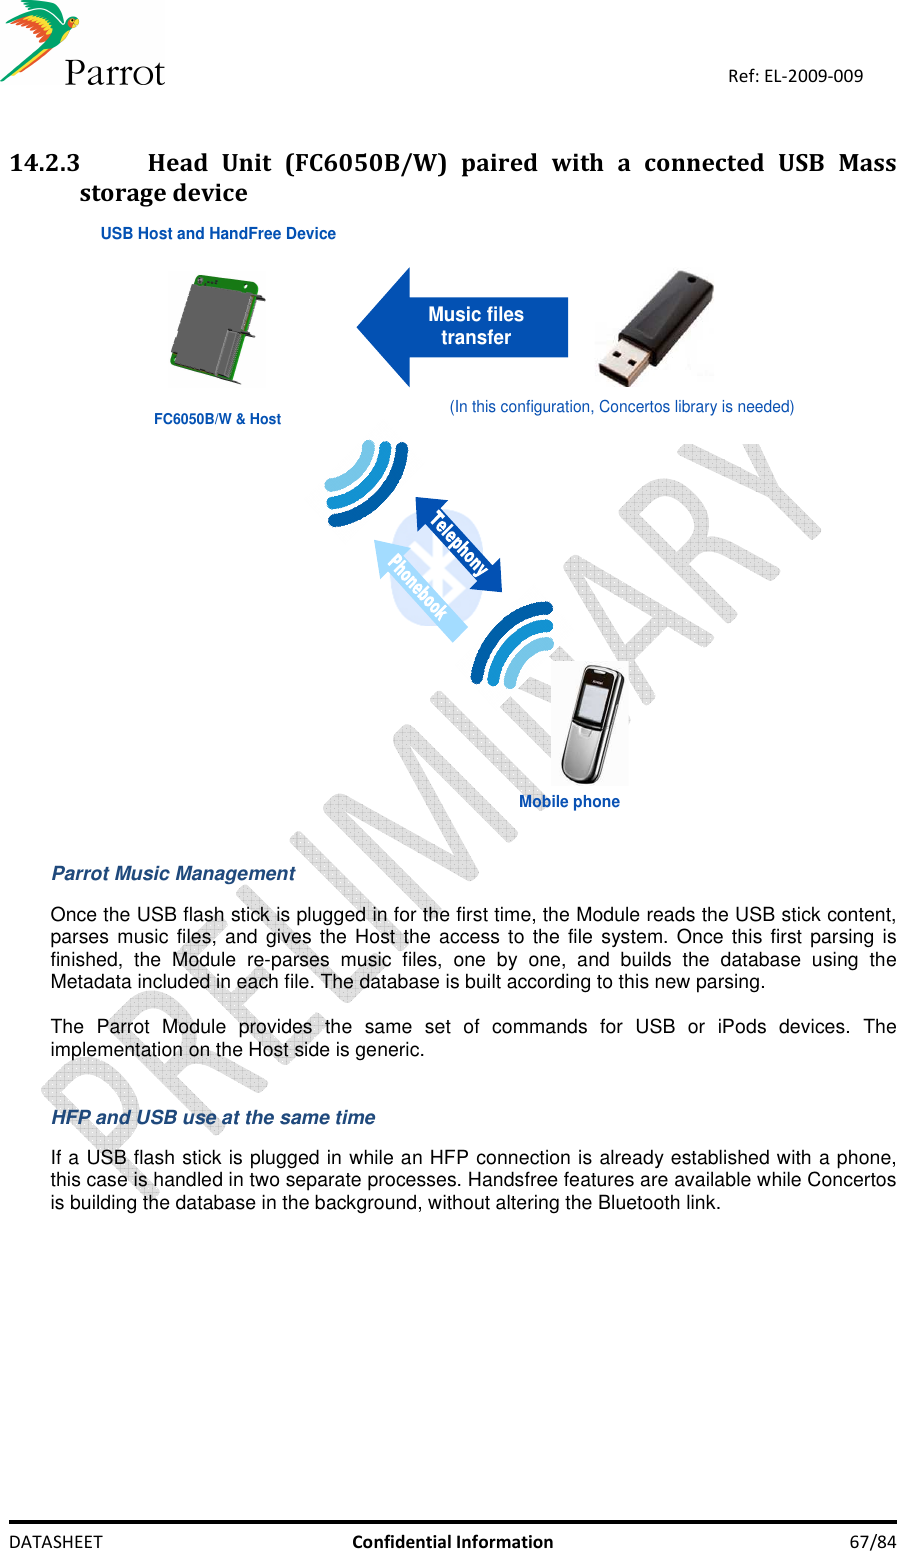    DATASHEET  Confidential Information  67/84 Ref: EL-2009-009  14.2.3 Head  Unit  (FC6050B/W)  paired  with  a  connected  USB  Mass storage device   Music files transfer (In this configuration, Concertos library is needed) USB Host and HandFree DeviceMobile phone FC6050B/W &amp; Host    Parrot Music Management  Once the USB flash stick is plugged in for the first time, the Module reads the USB stick content, parses music  files, and gives the Host the access to the file  system.  Once  this first  parsing is finished,  the  Module  re-parses  music  files,  one  by  one,  and  builds  the  database  using  the Metadata included in each file. The database is built according to this new parsing.  The  Parrot  Module  provides  the  same  set  of  commands  for  USB  or  iPods  devices.  The implementation on the Host side is generic.   HFP and USB use at the same time  If a USB flash stick is plugged in while an HFP connection is already established with a phone, this case is handled in two separate processes. Handsfree features are available while Concertos is building the database in the background, without altering the Bluetooth link.  